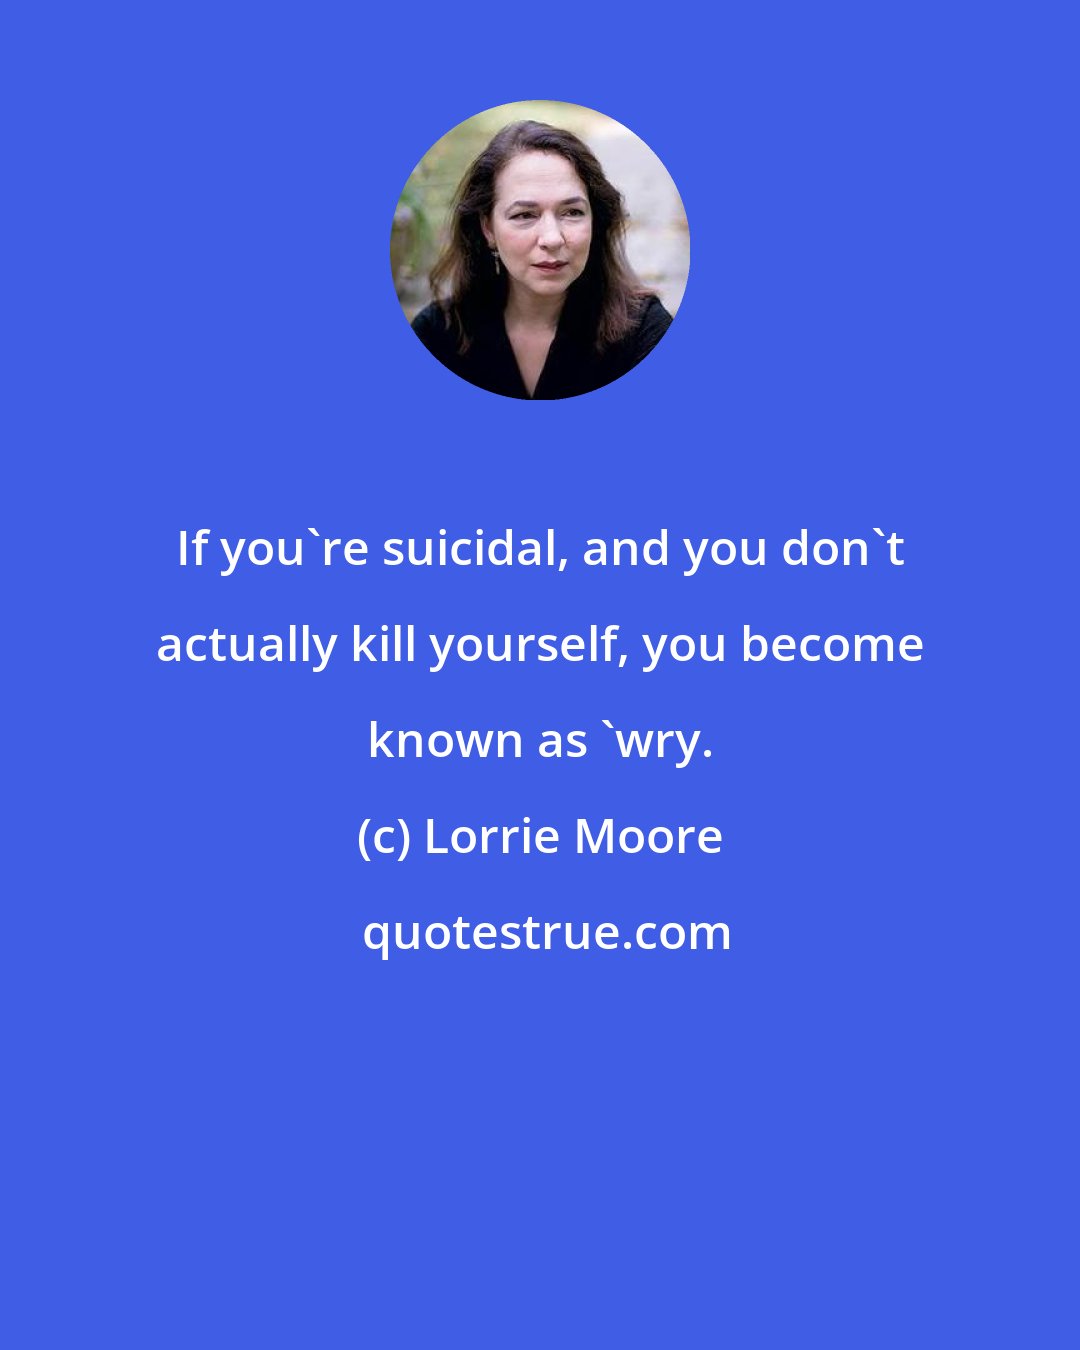 Lorrie Moore: If you're suicidal, and you don't actually kill yourself, you become known as 'wry.